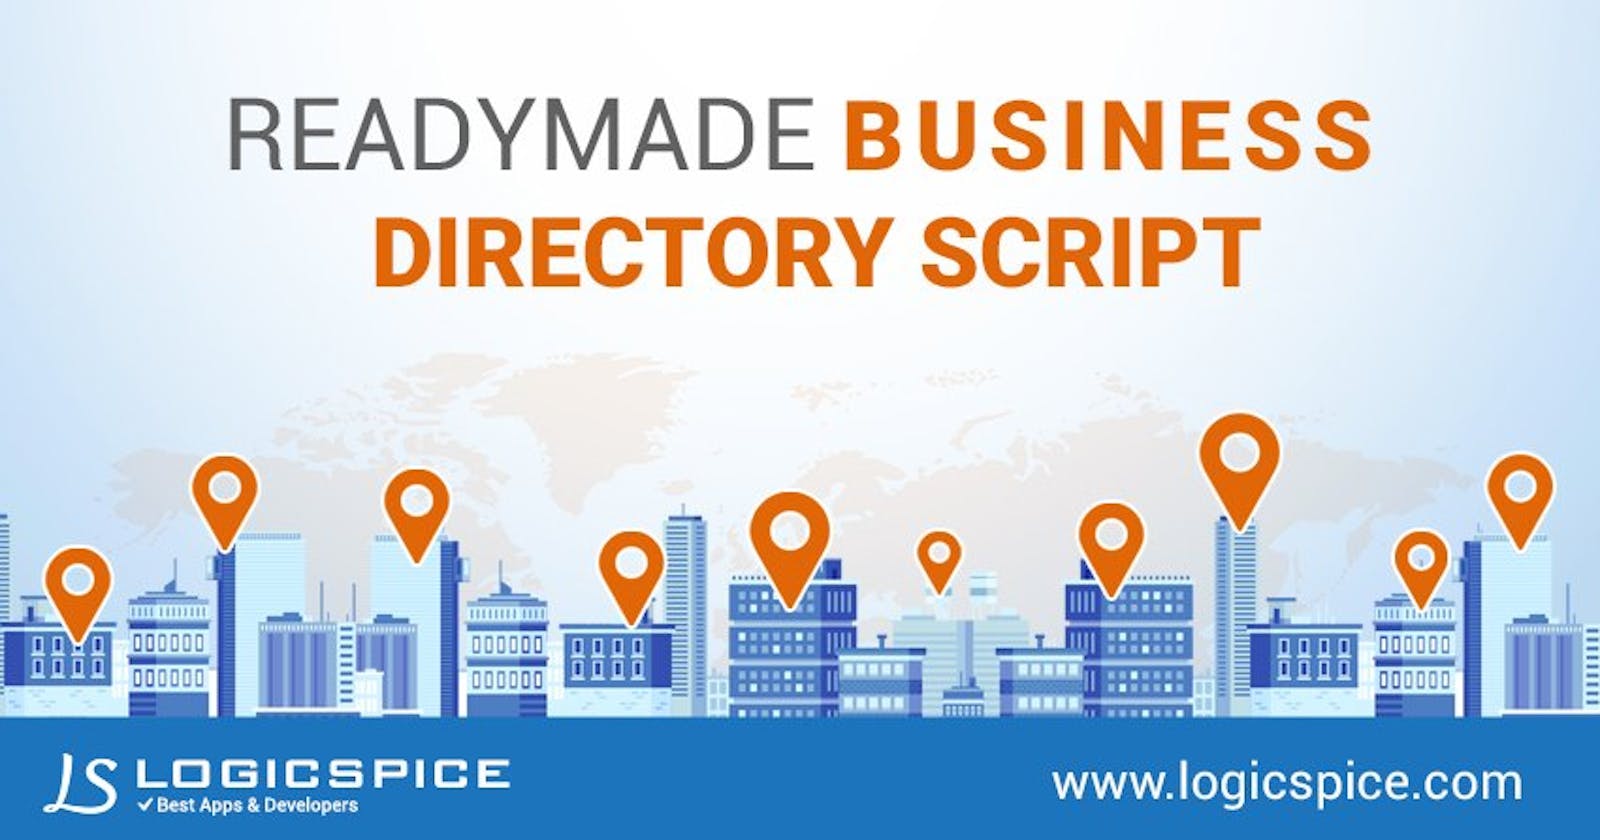 How is a business directory important for business?